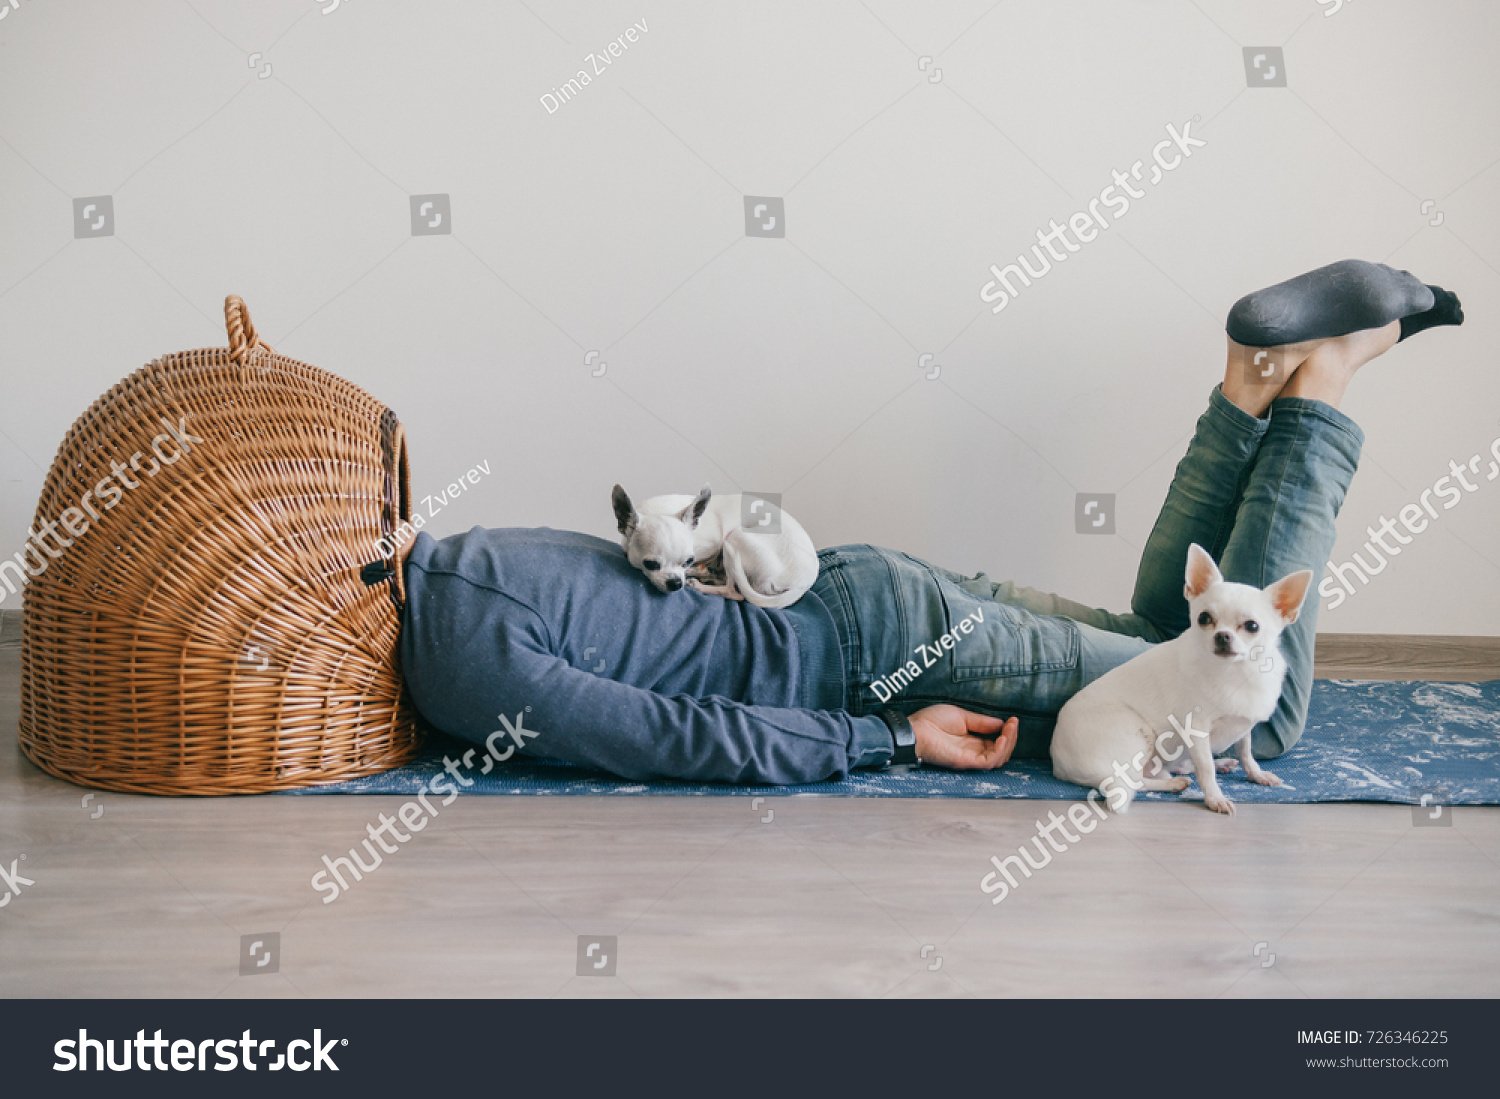 A seriously strange stock image of a person with their head in a wicker basket surrounded by dogs. 